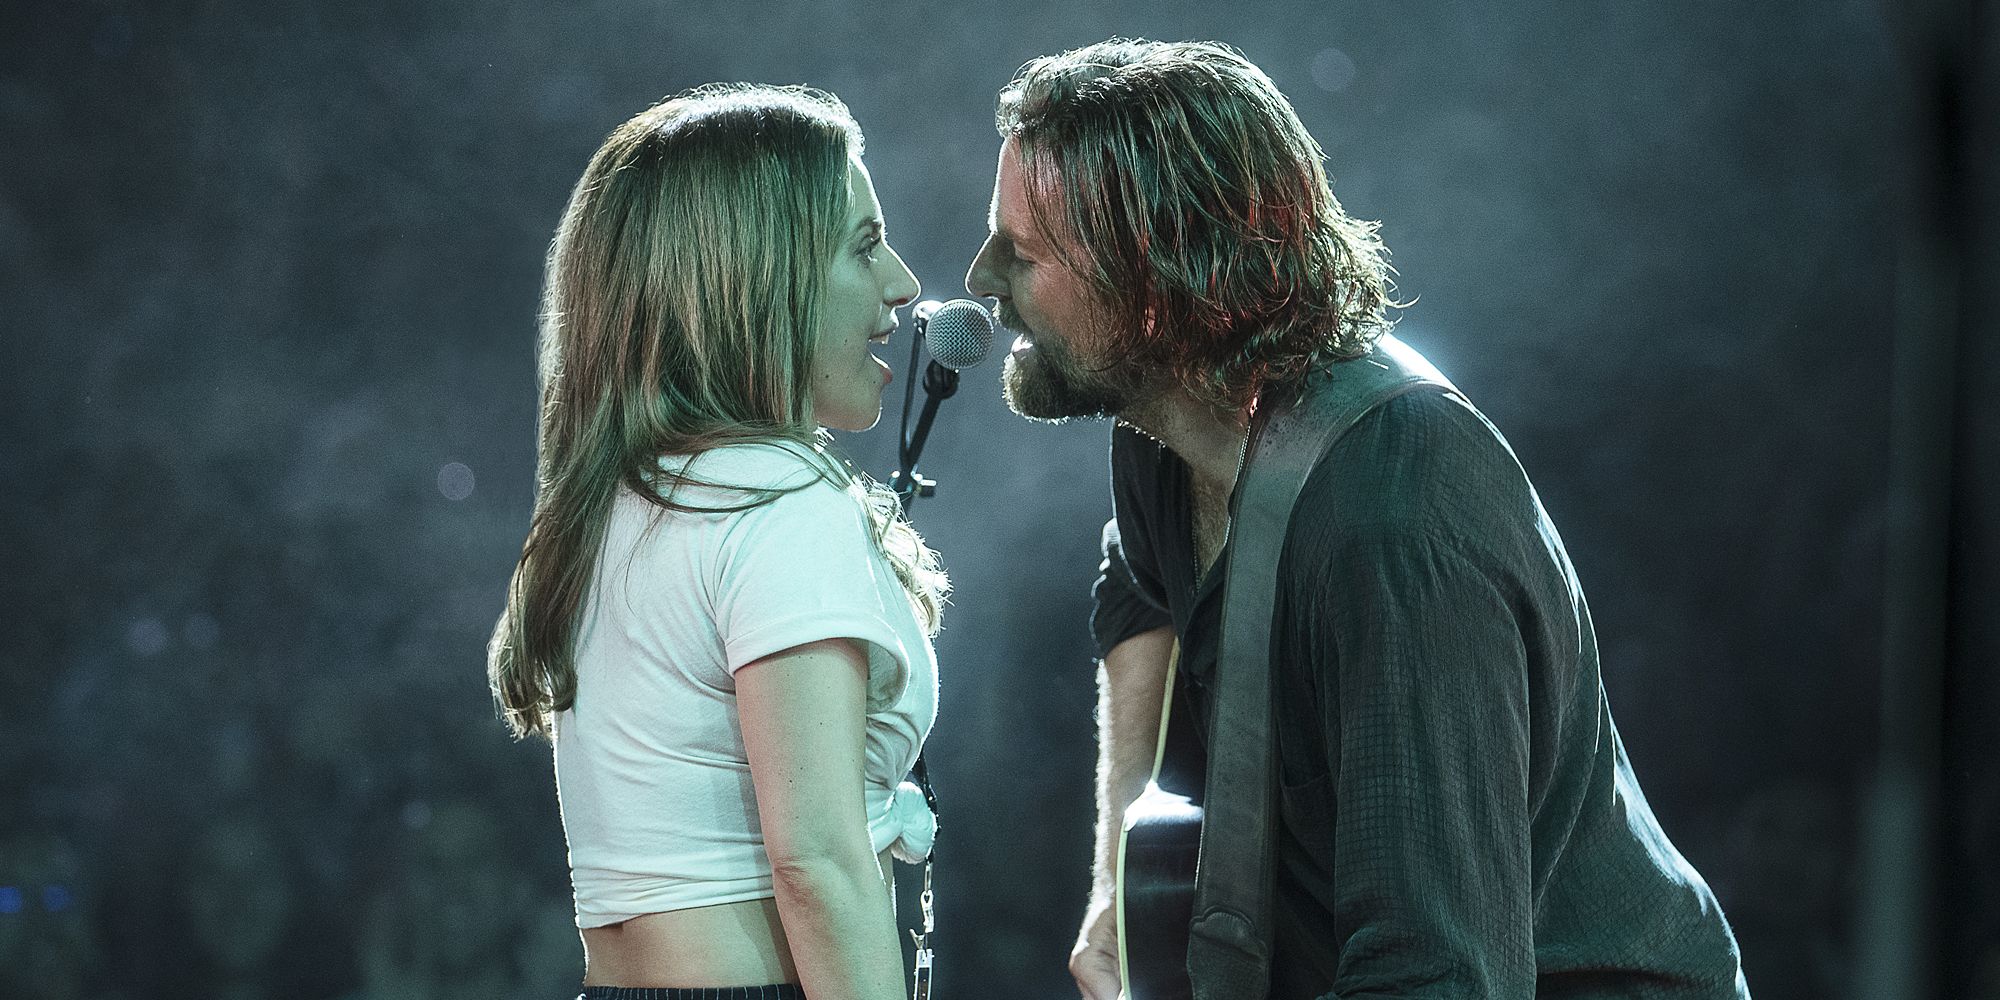 Lady Gaga and Bradley Cooper as Ally and Jackson Maine singing together in A Star is Born